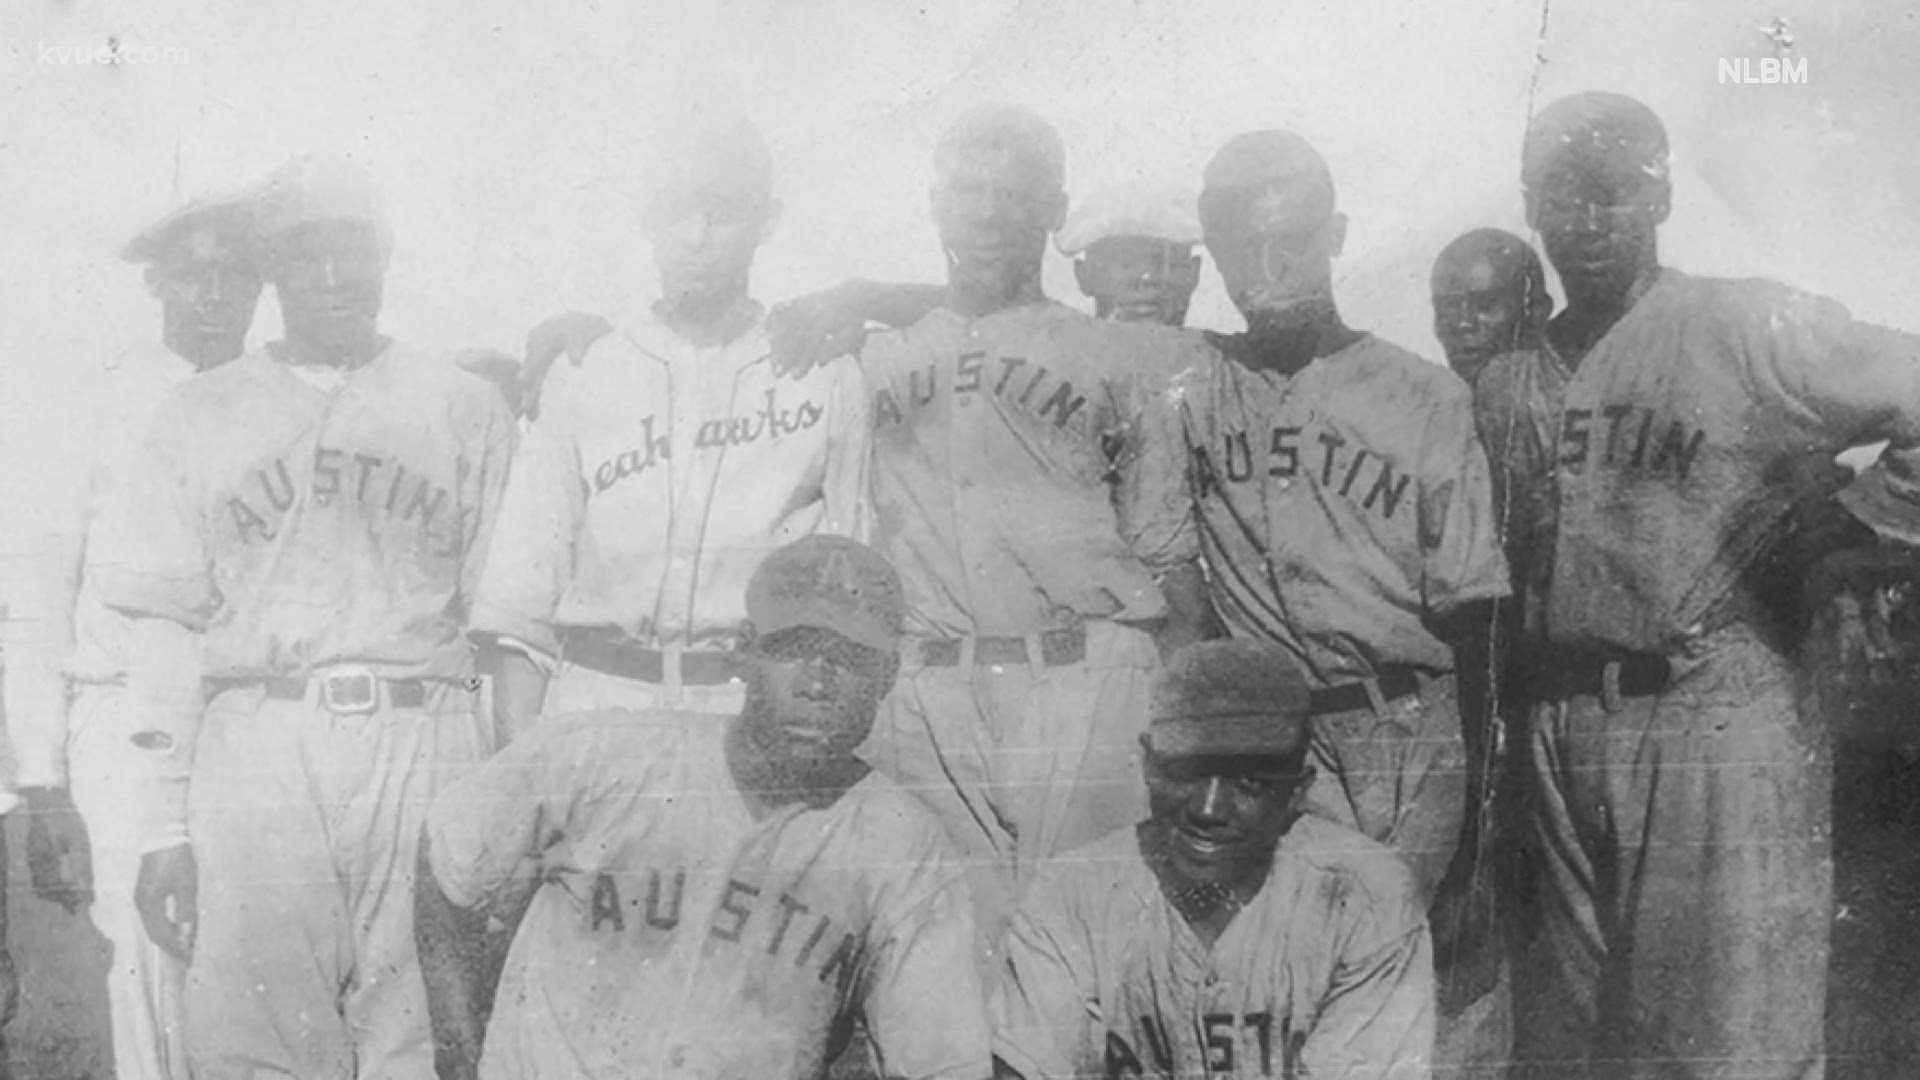 As Austin's only professional sports team in the 1920s and 1930s, they should have been an integral part of the city's culture. Instead, they were largely ignored.